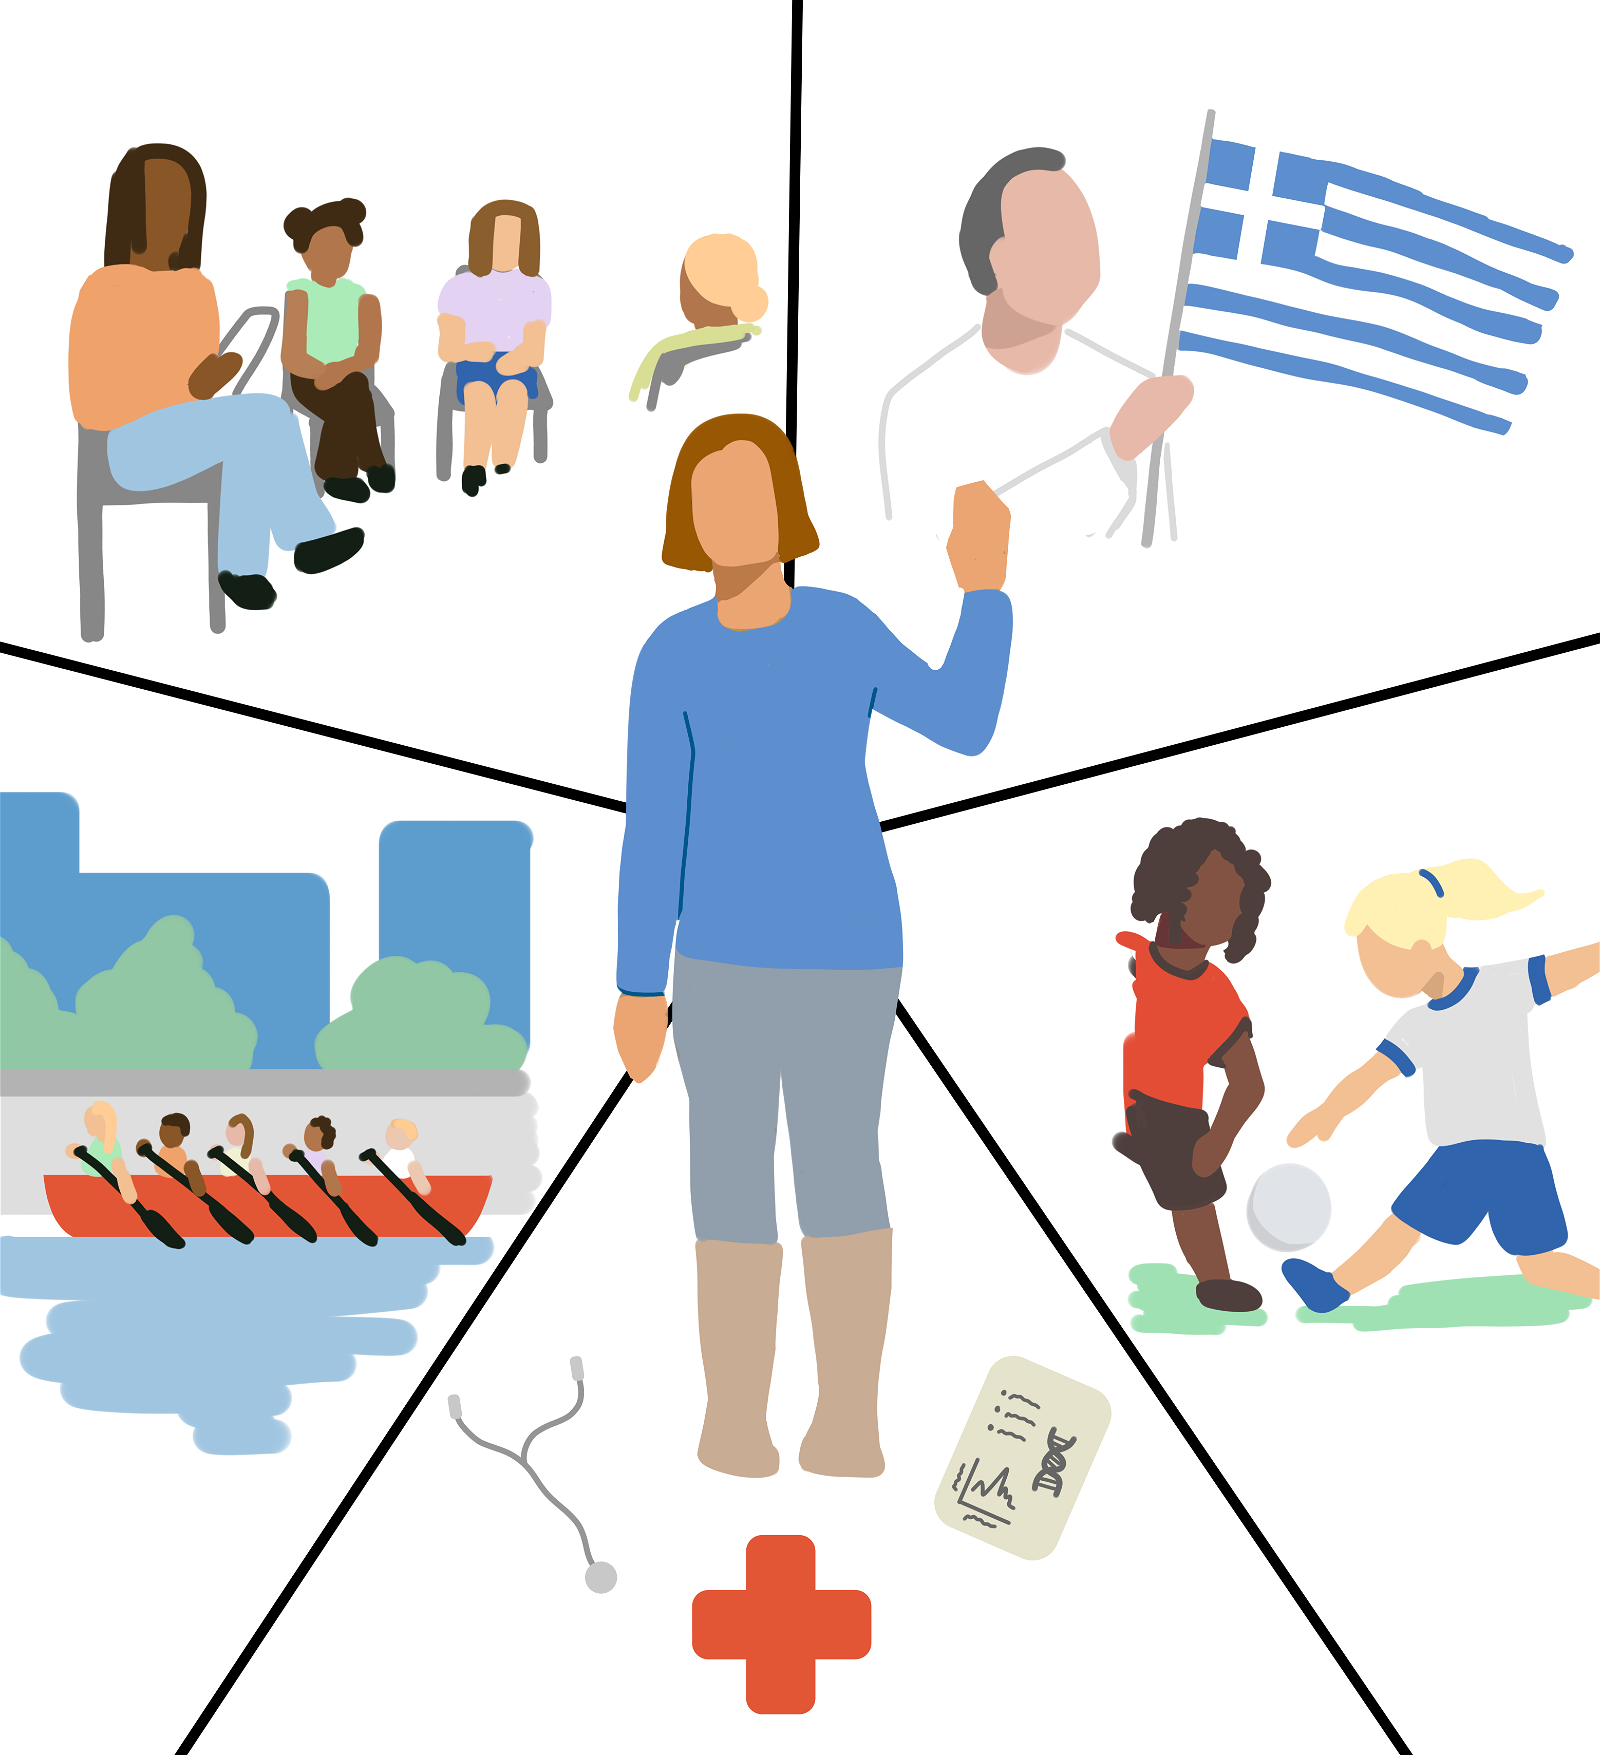 An illustration of a woman with a blue shirt and grey pants standing in the center of the image. Her hand is up as if waving. The illustration of the woman, as well as all other illustrations of people, does not include facial features.

Around the woman are five segments. Beginning at the top right and proceeding clockwise, the segments show a man holding the flag of Greece; two girls playing soccer together wearing different uniform colors; a stethoscope, a red cross, and a page with medical records; a team of five people rowing a red boat in an urban river; and a woman seated in a chair leading a discussion or class with three other women.